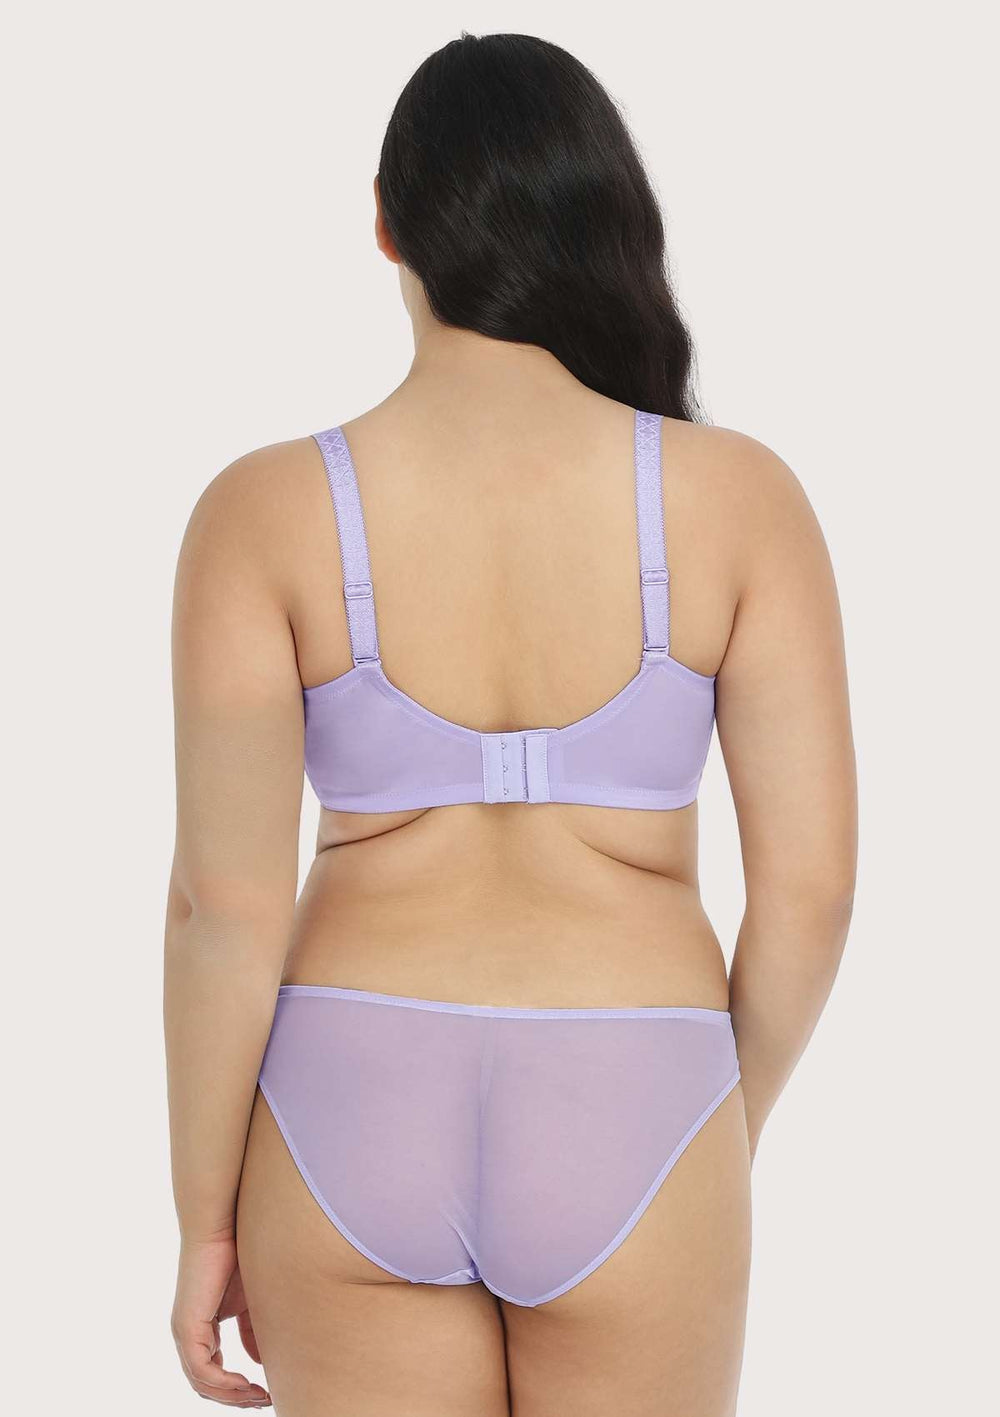 Frosty Lavender, 38E) Susa 7814 Women's Latina Floral Lace Non-Padded  Non-Wired Soft Bra on OnBuy